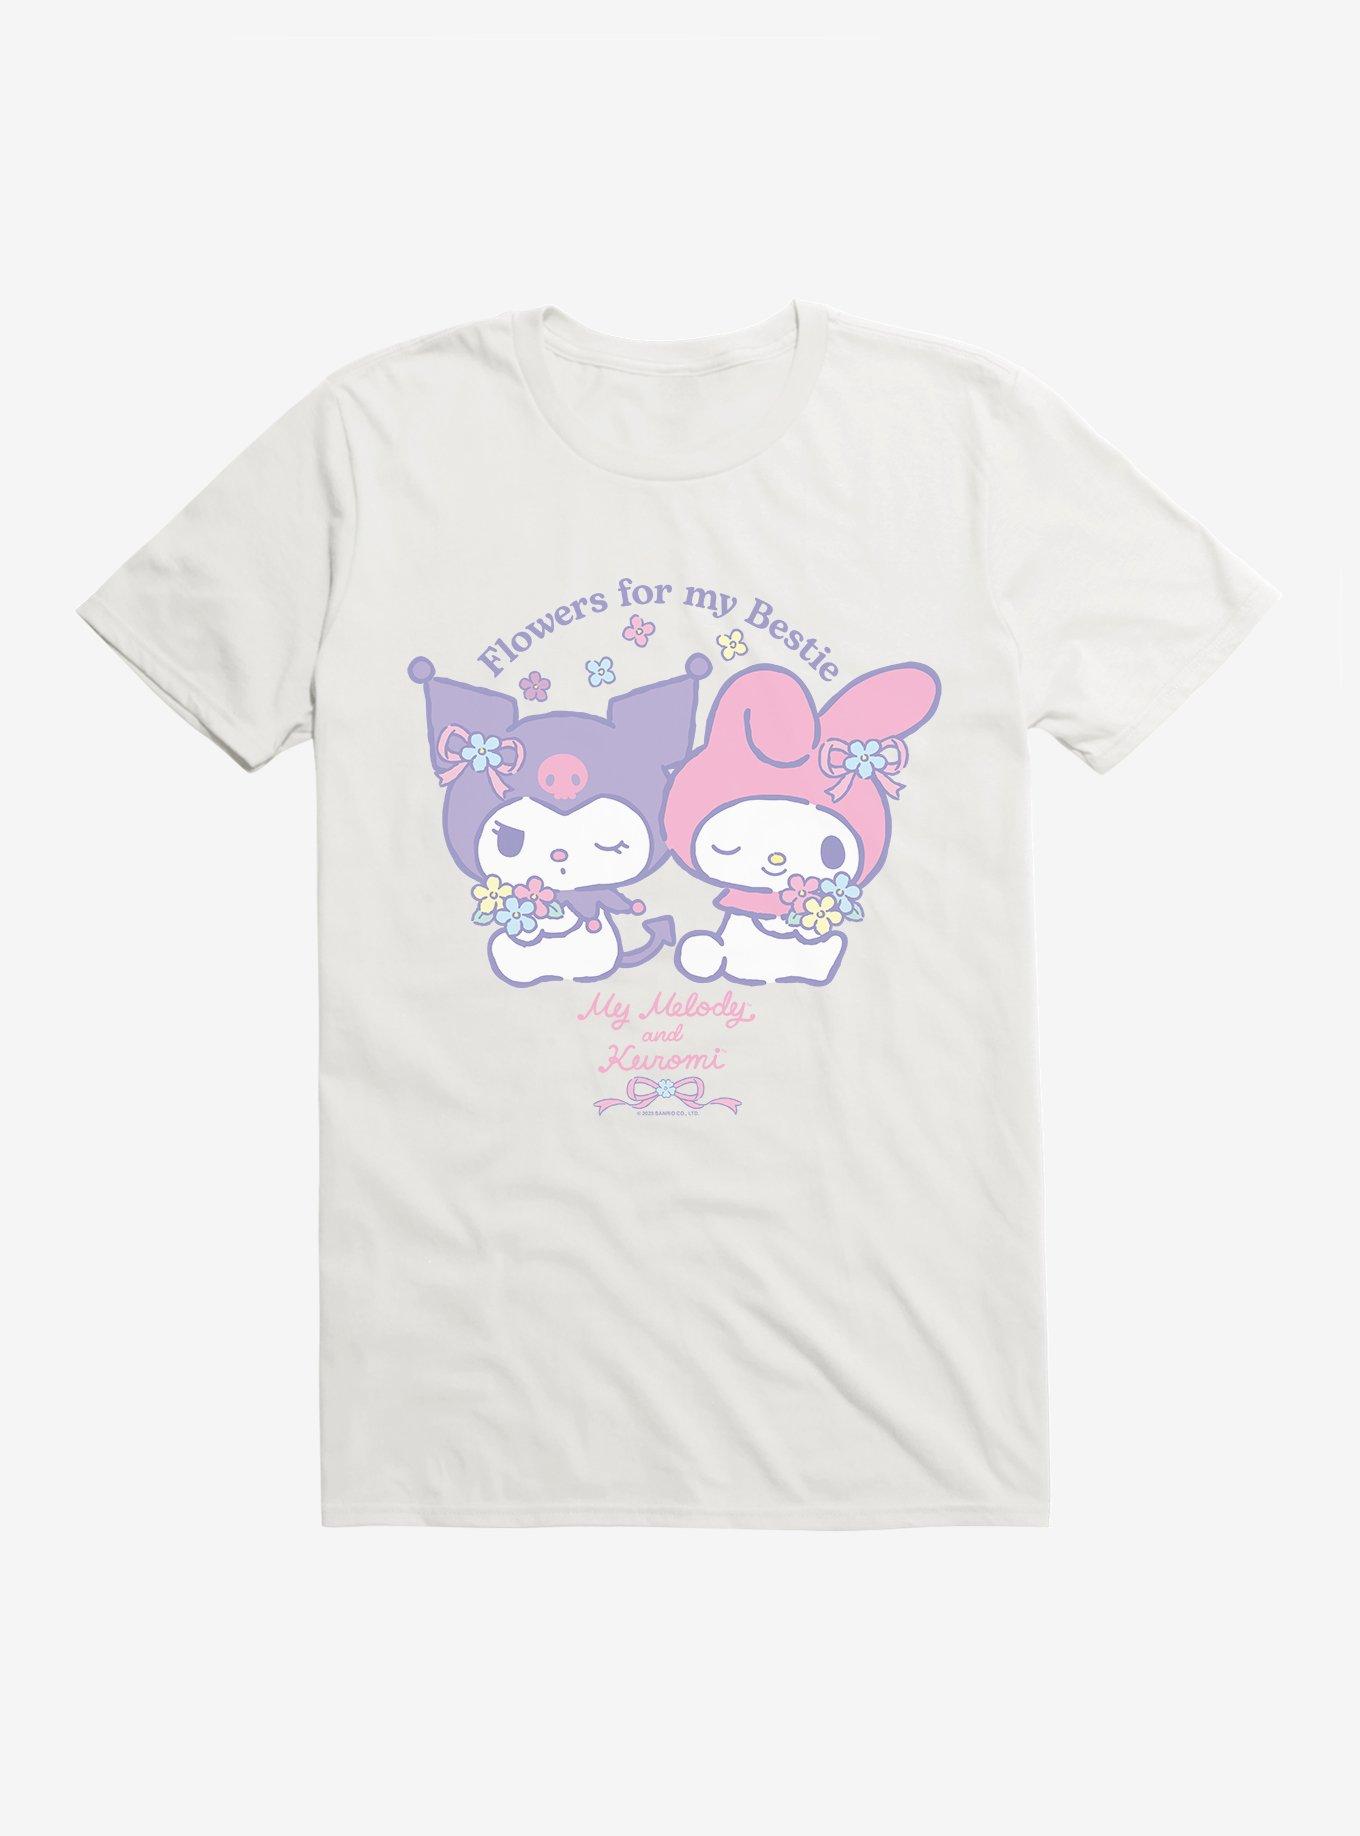 My Melody & Kuromi Flowers For My Bestie T-Shirt, WHITE, hi-res